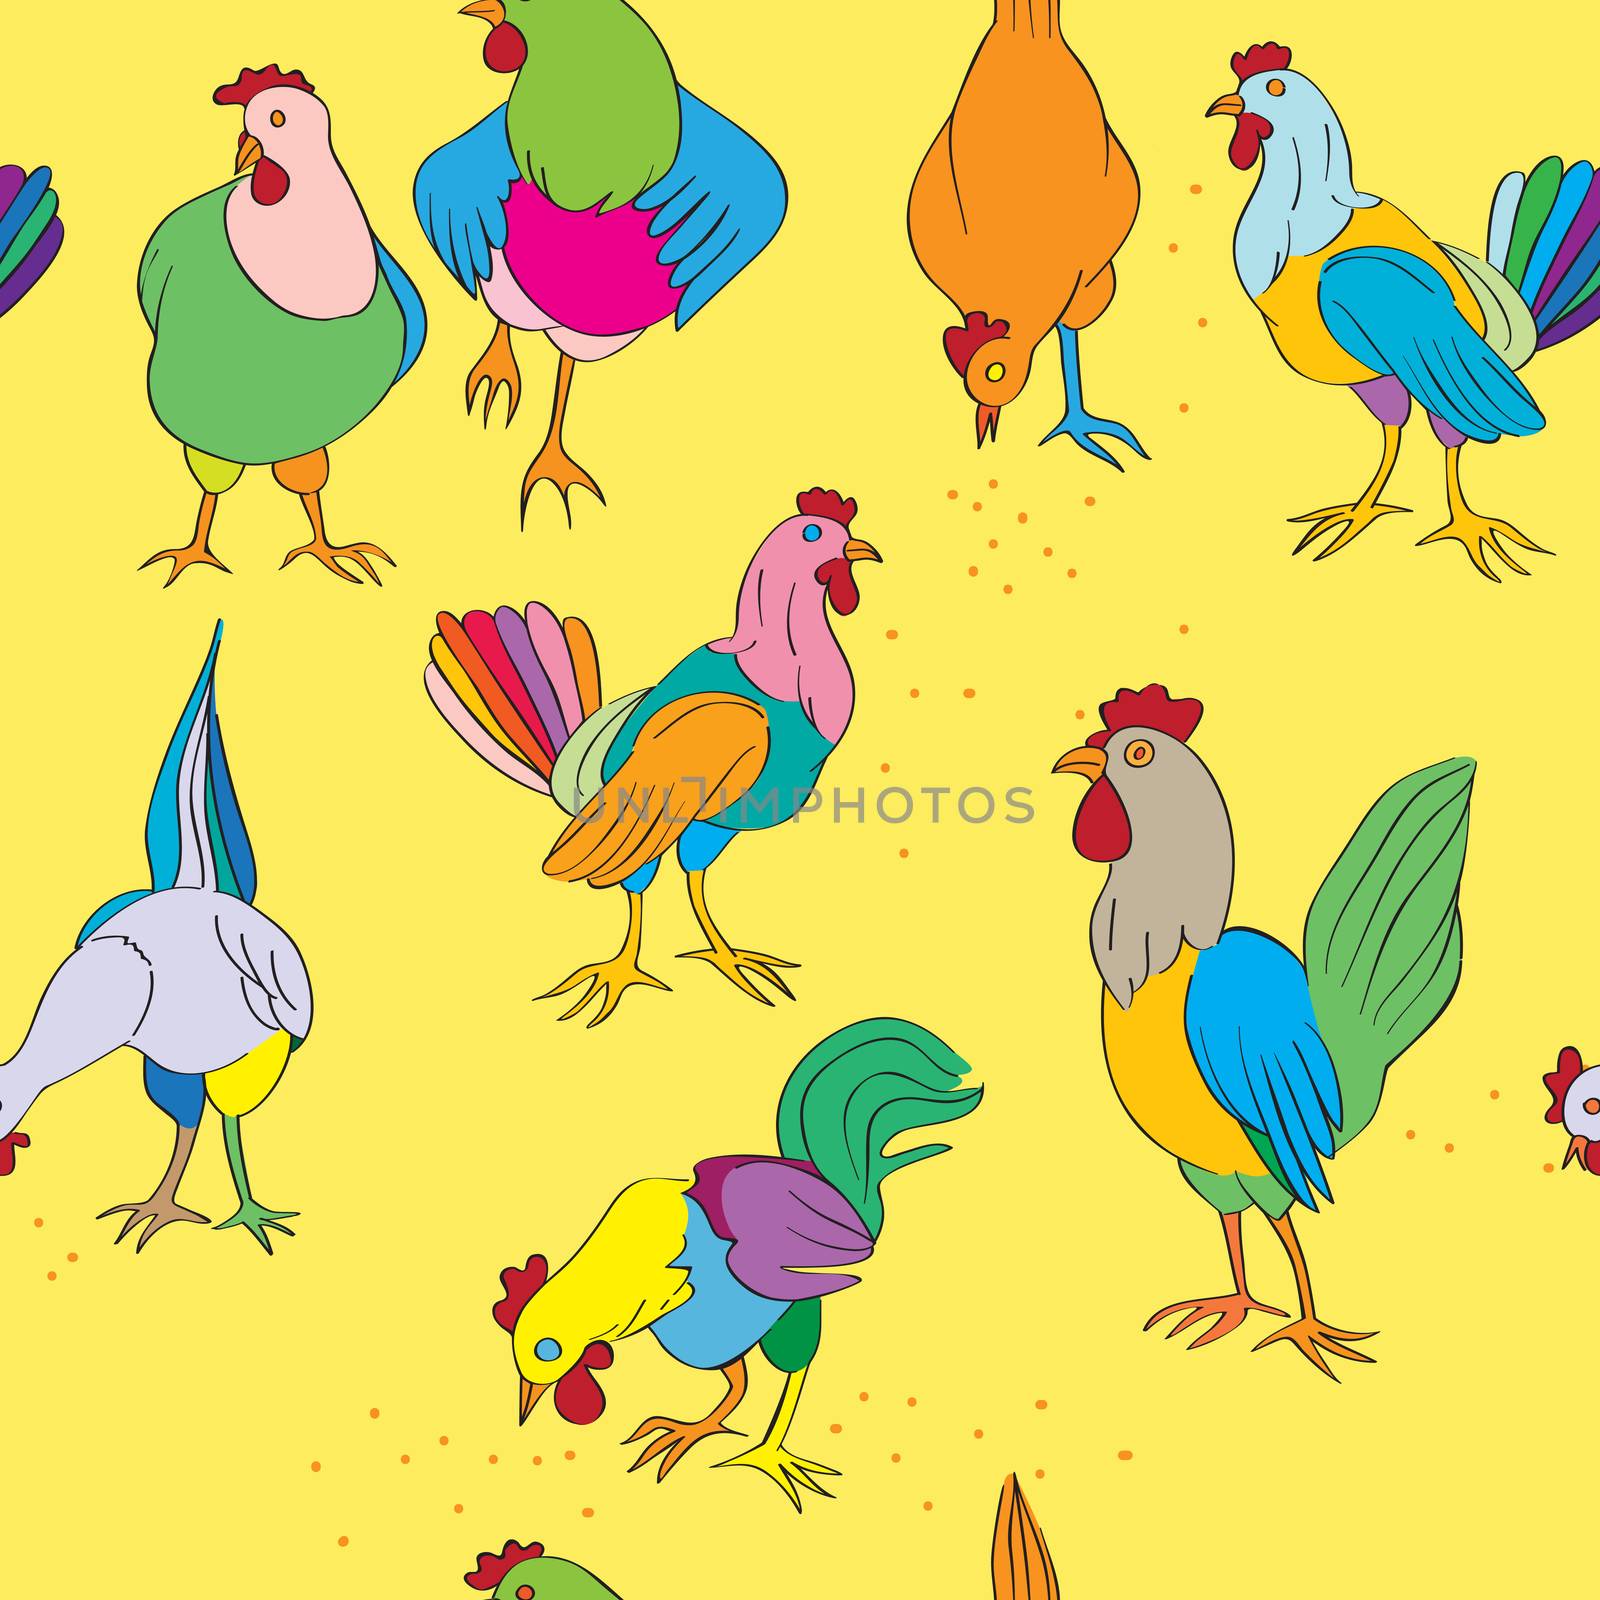 Hens and roosters seamless pattern, hand drawn illustration of colored farm birds on a yellow background